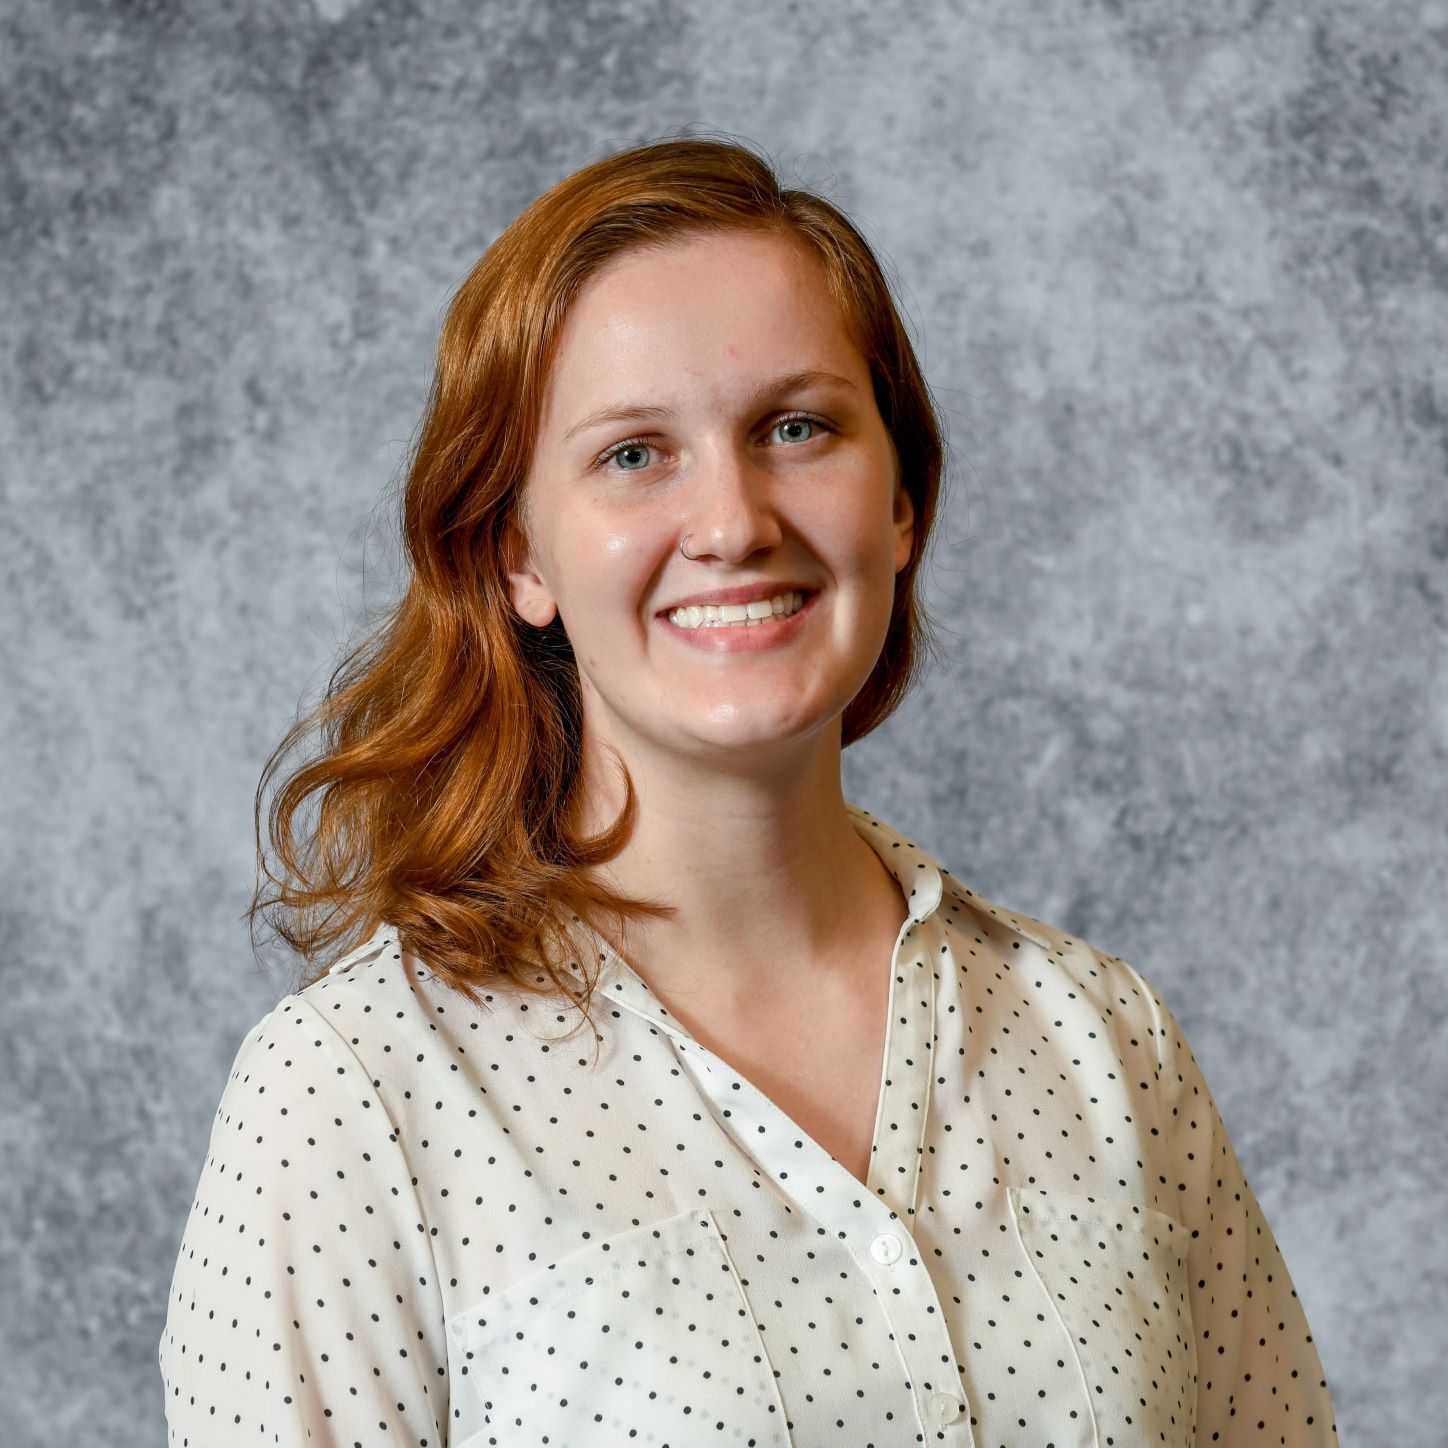 The image represents the headshot of graduate student Sarah Kromer wearing a printed button up shirt. The background behind is grey.